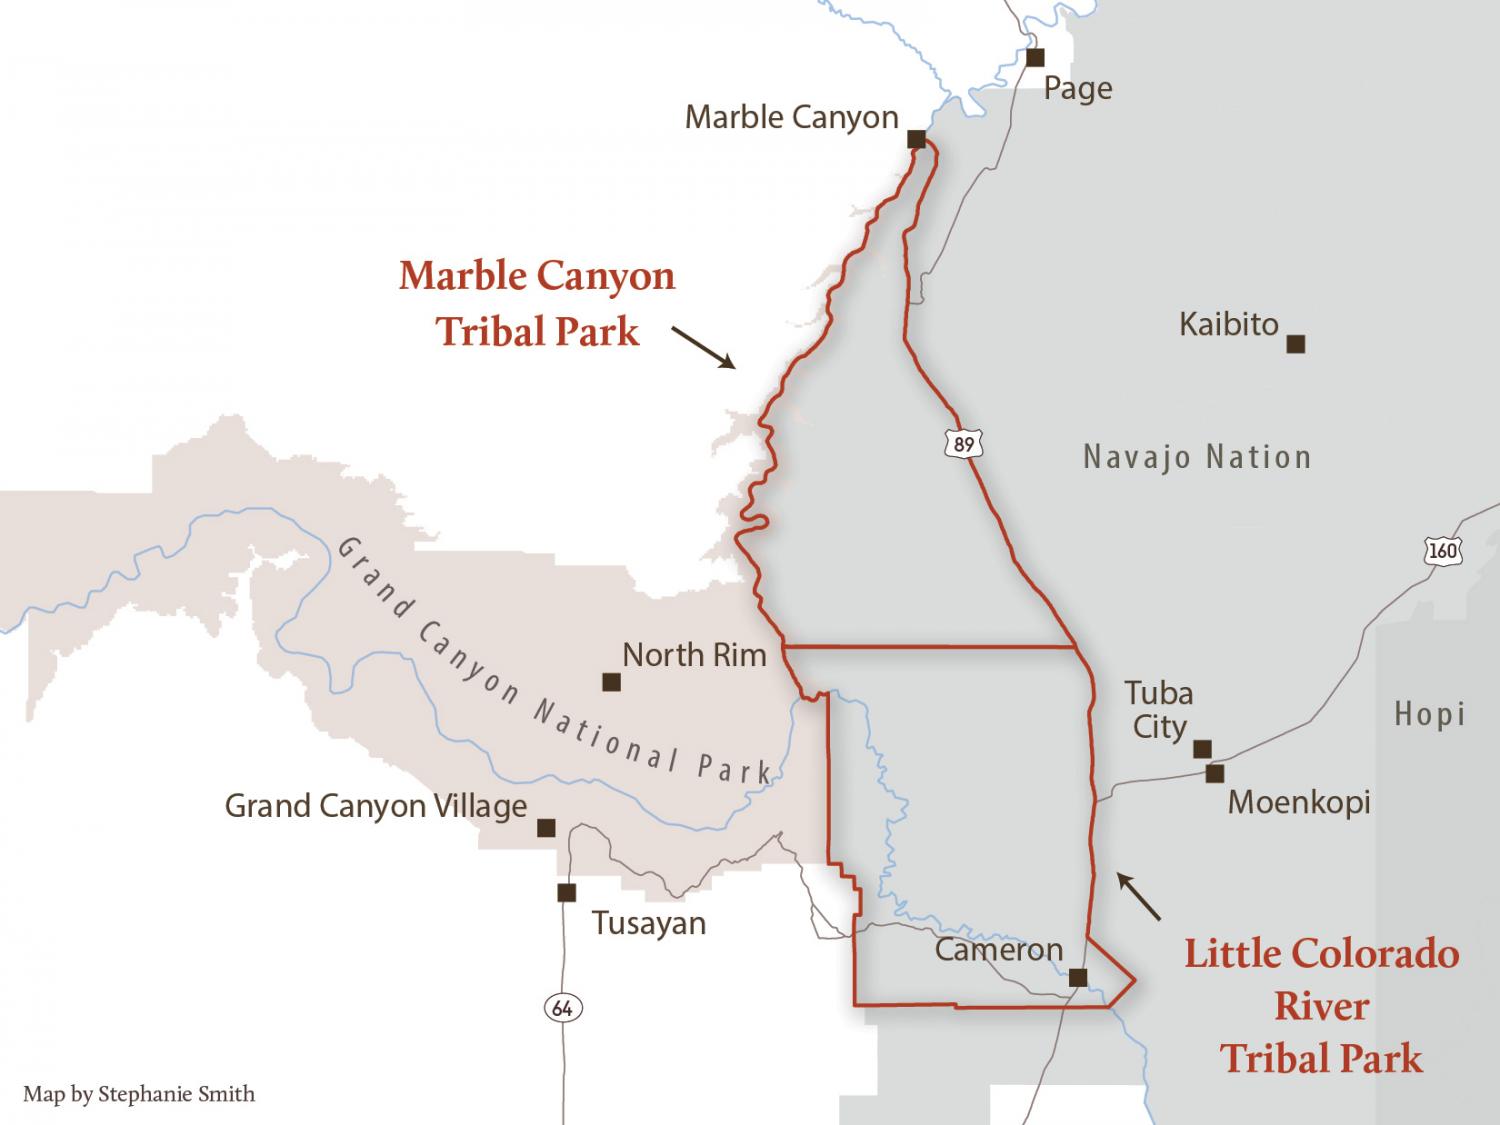 Map of the Little Colorado River Gorge and Marble Canyon Tribal Parks